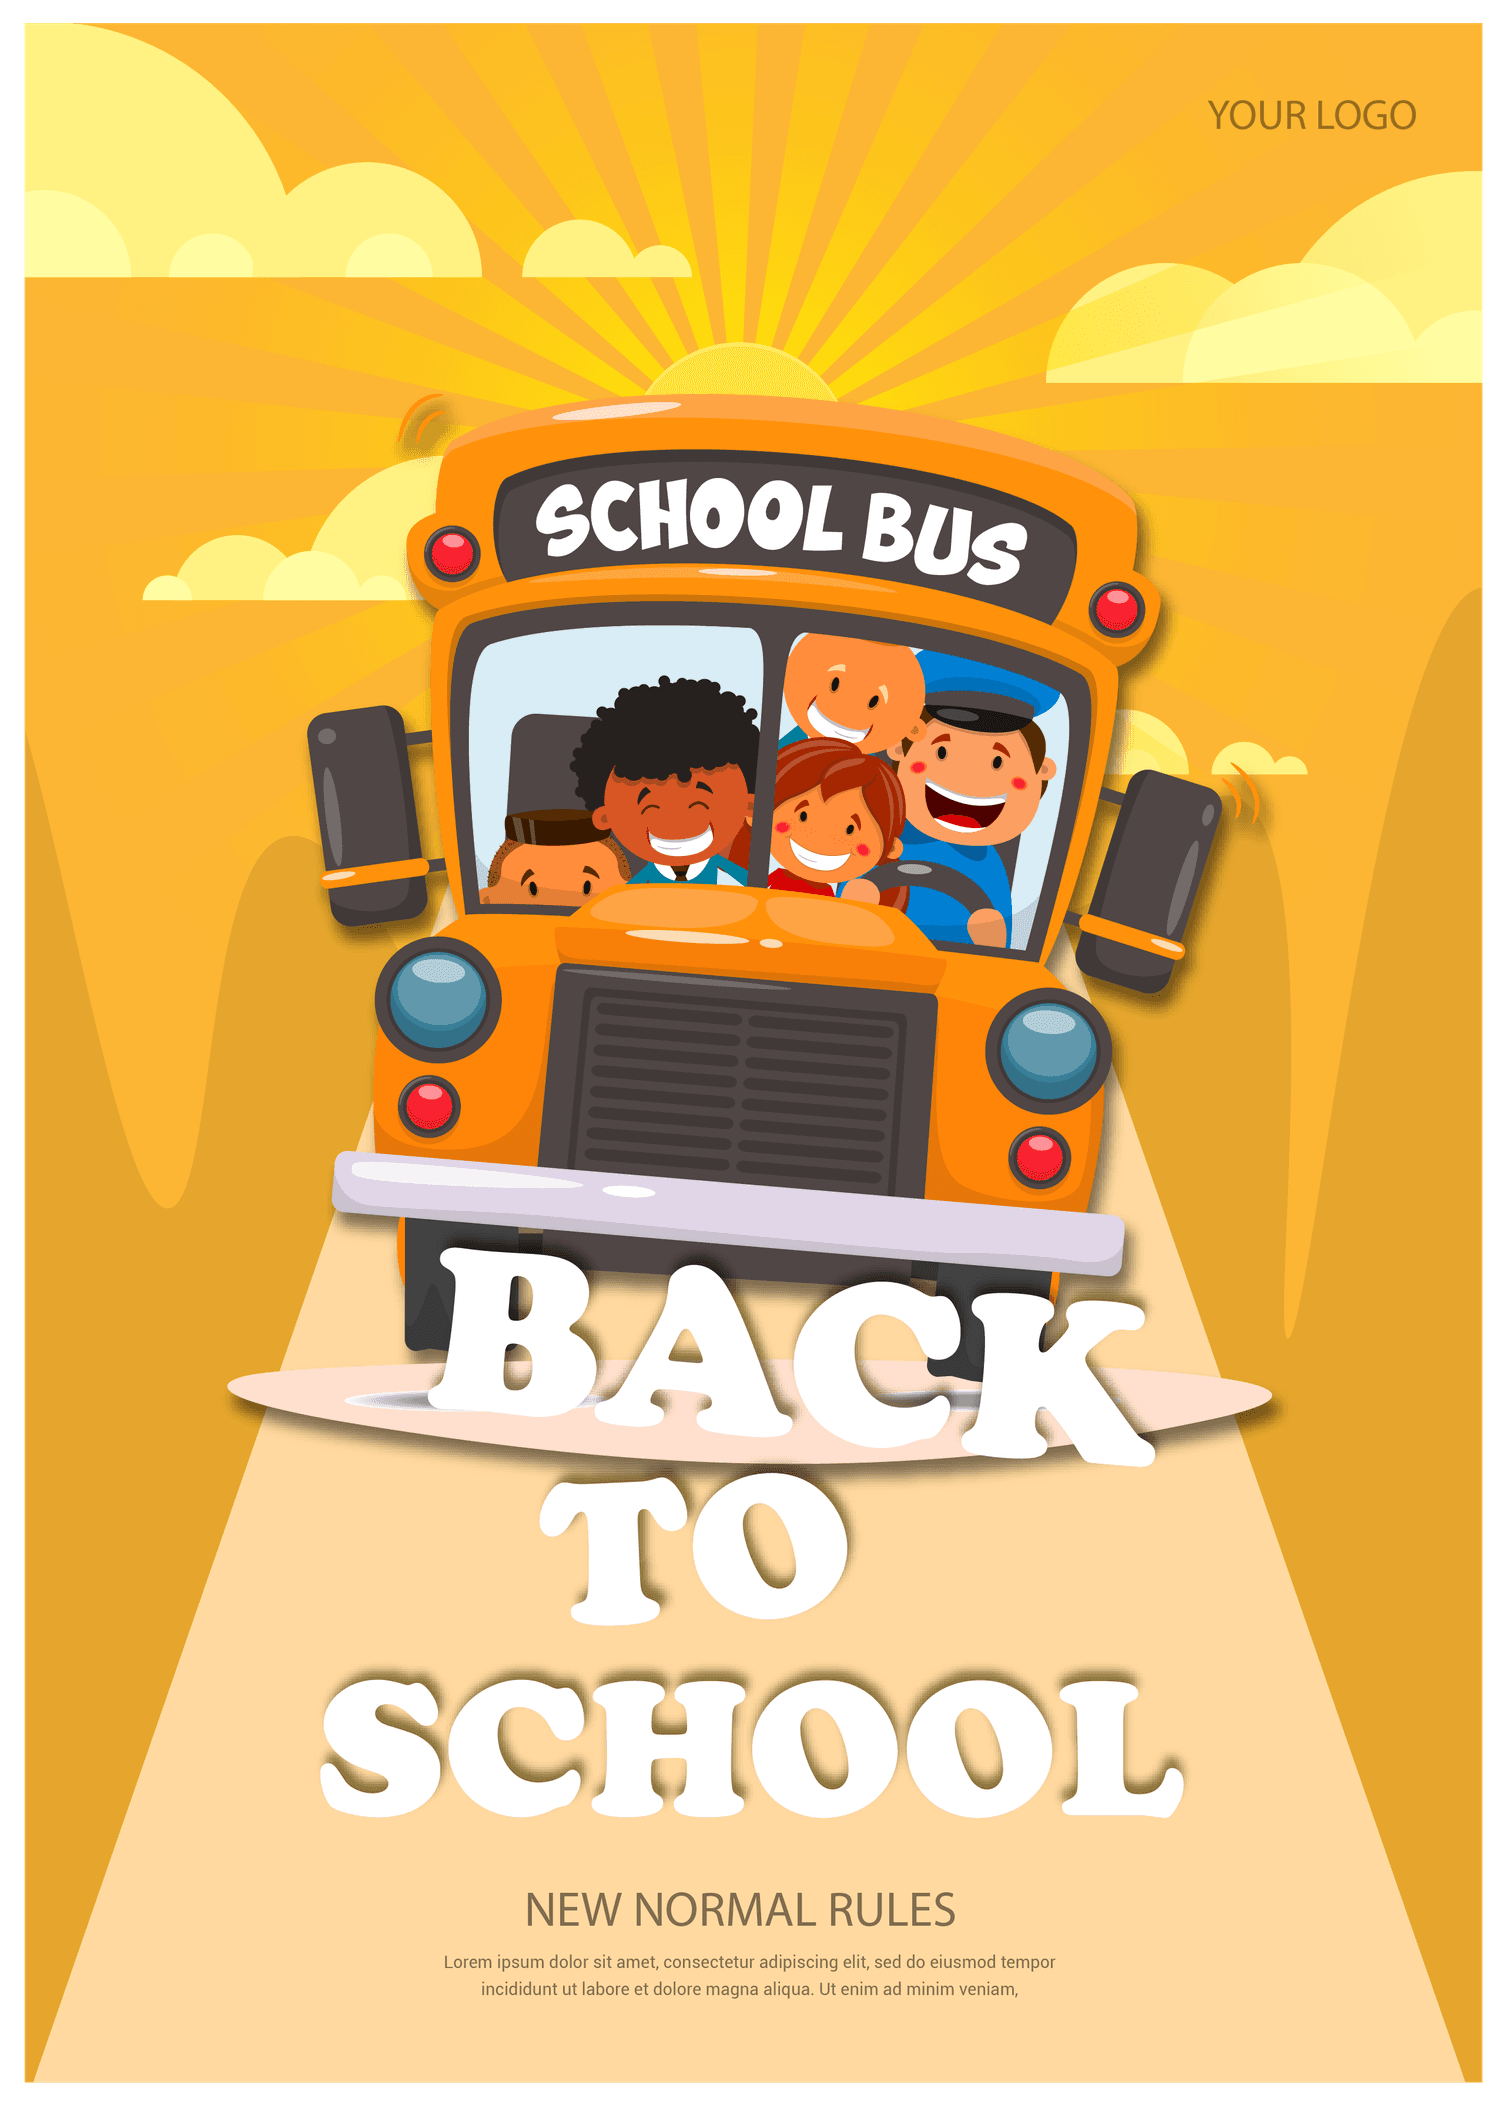 back to school fun poster template with vibrant color scheme and kid-friendly illustrations